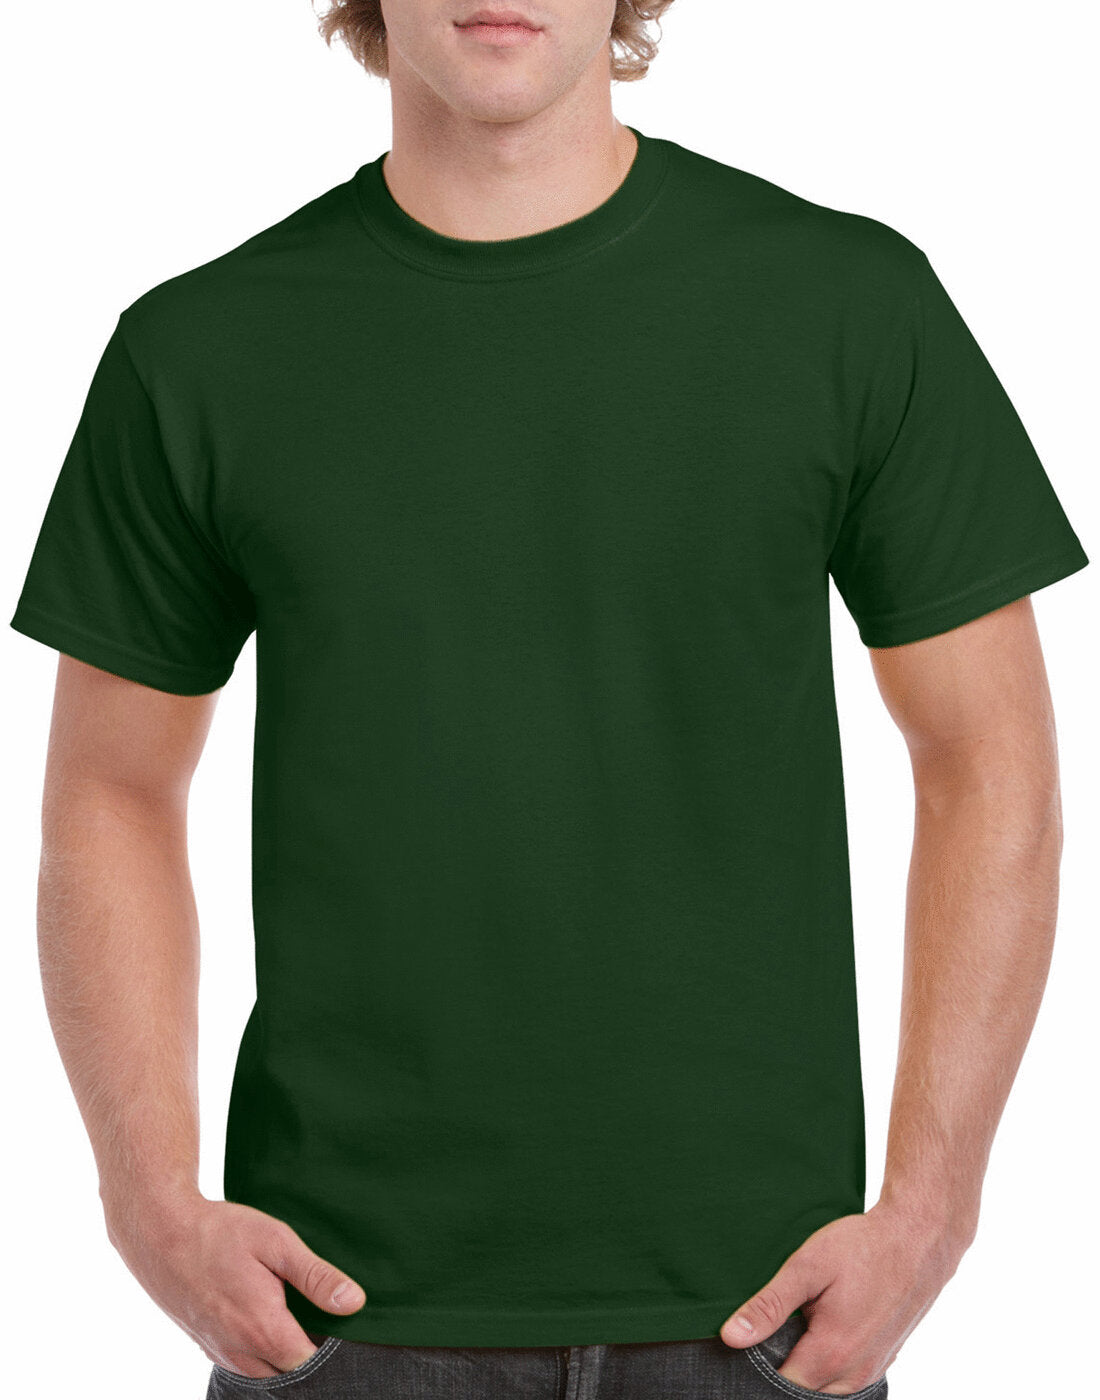 FRUIT OF THE LOOM Original Classic T shirt - Best value for Money - Lynendo Trade Store